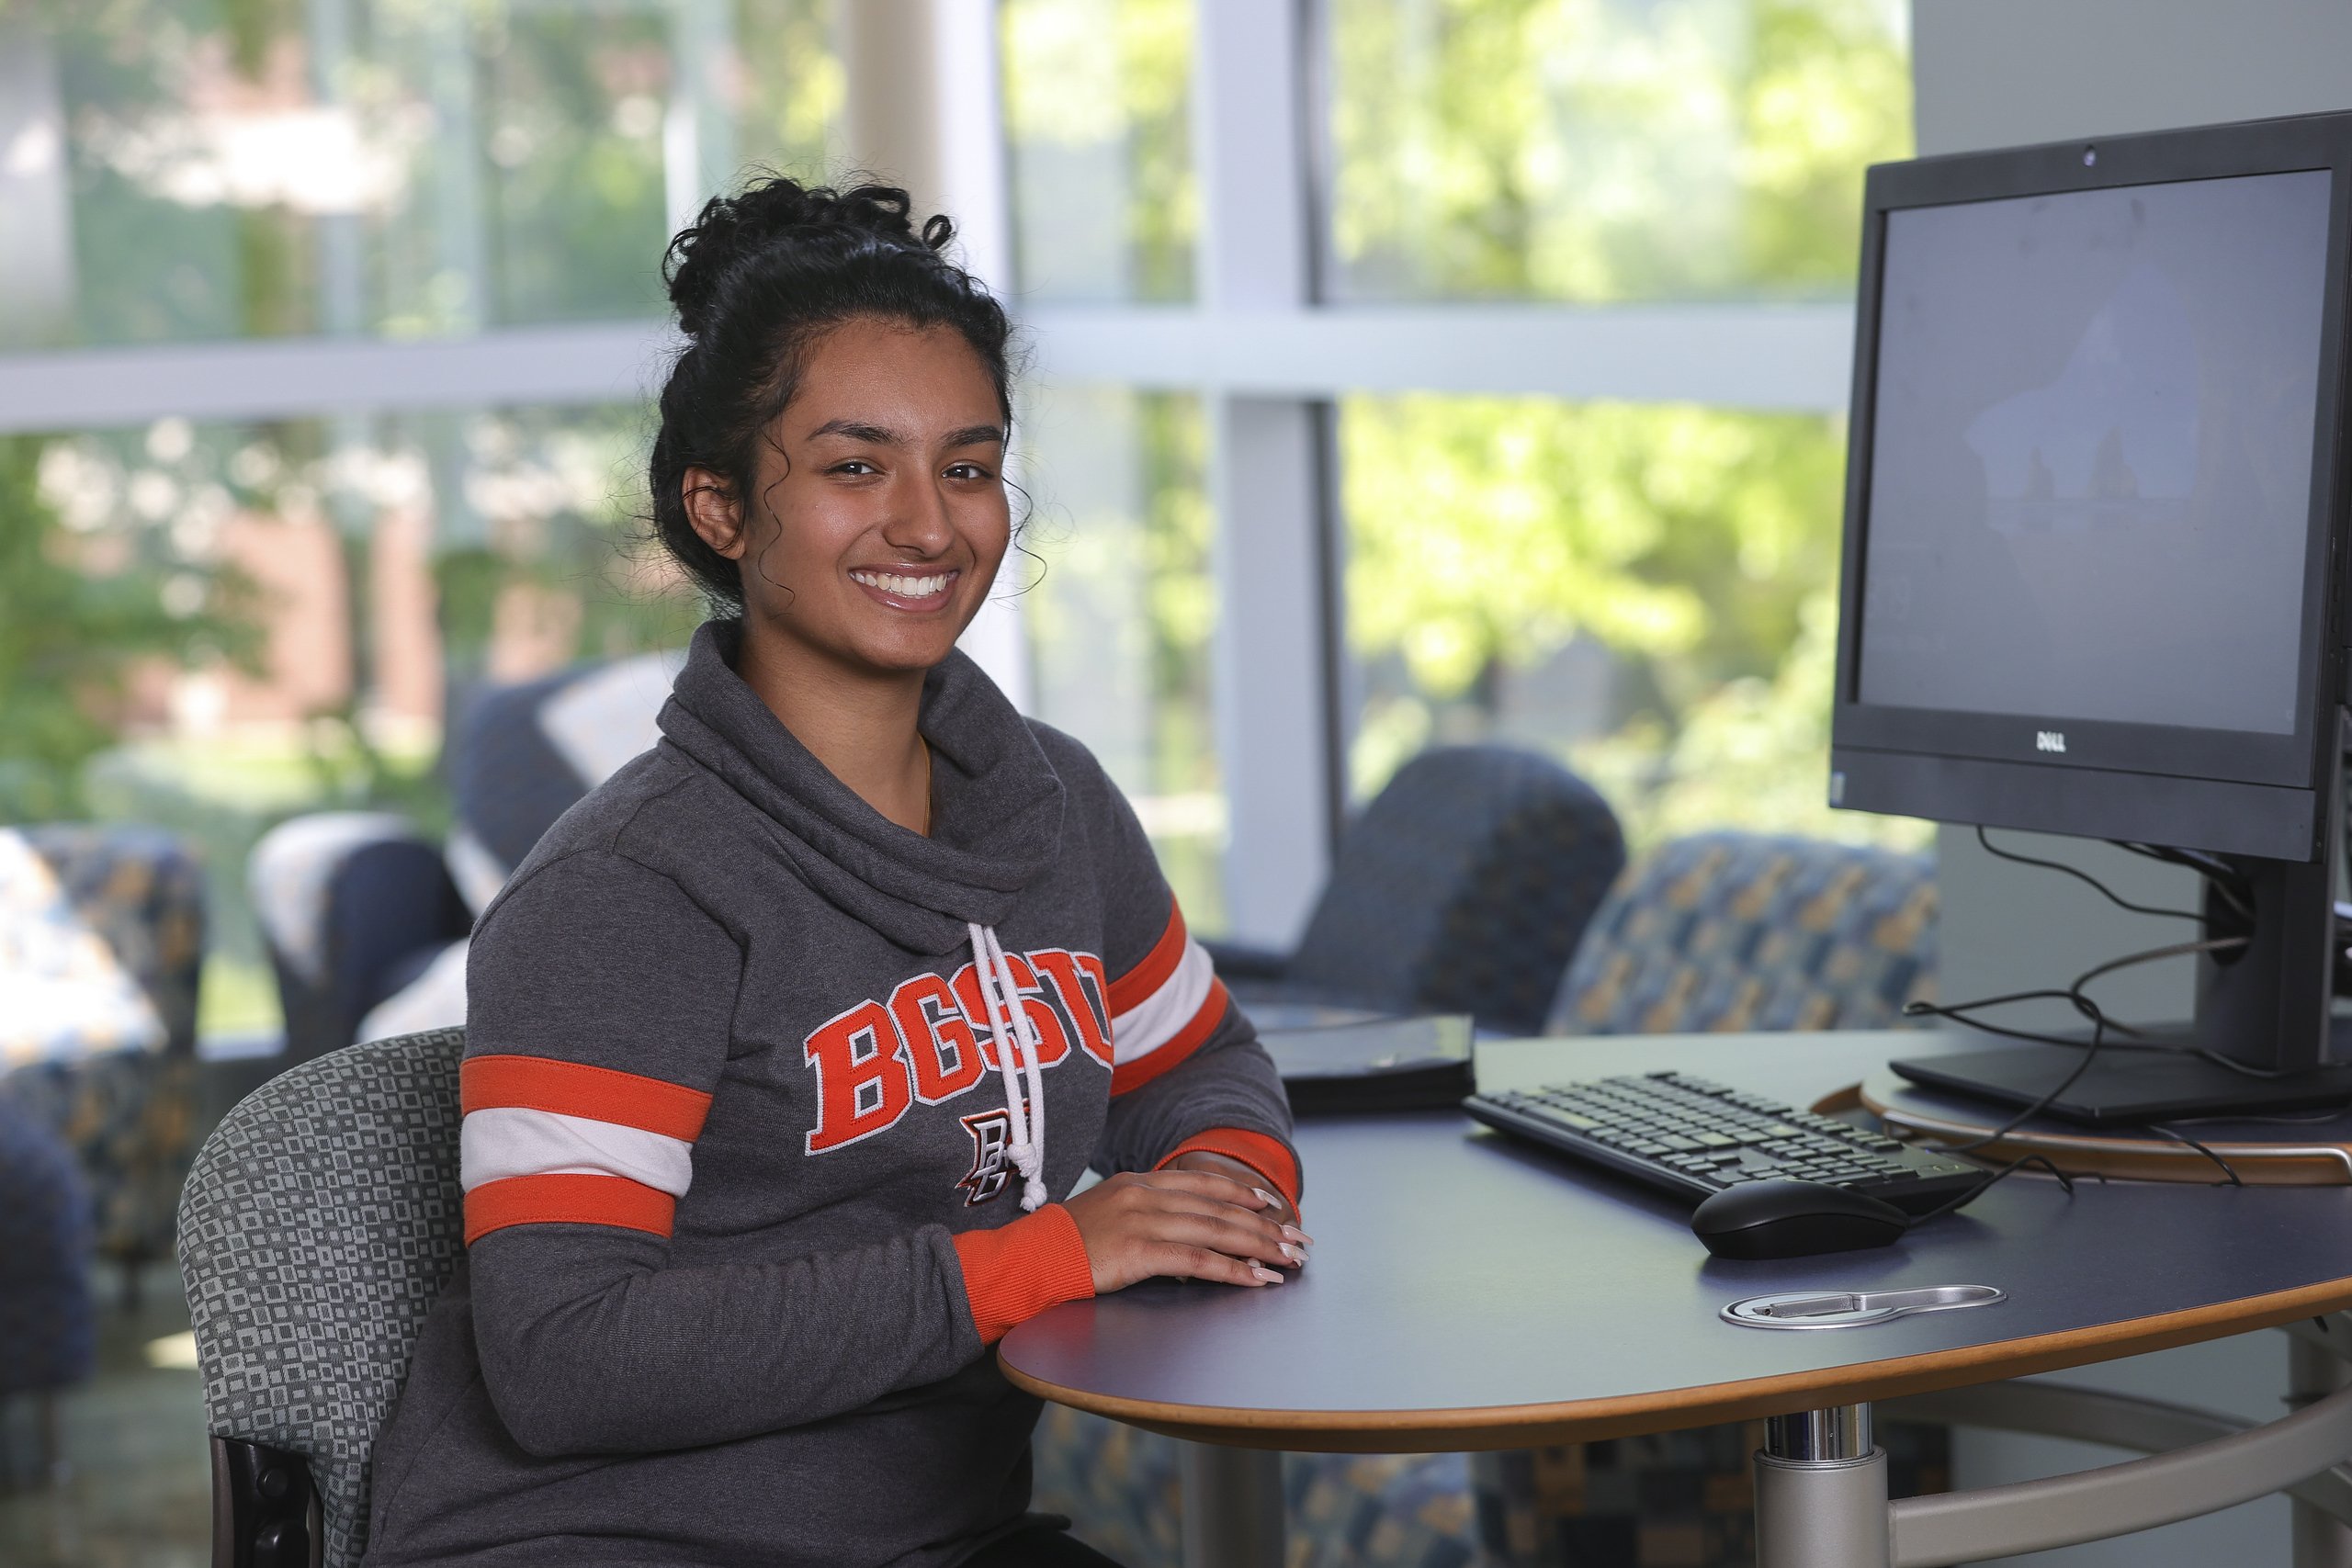 BGSU Firelands student gets hands-on education at the computer